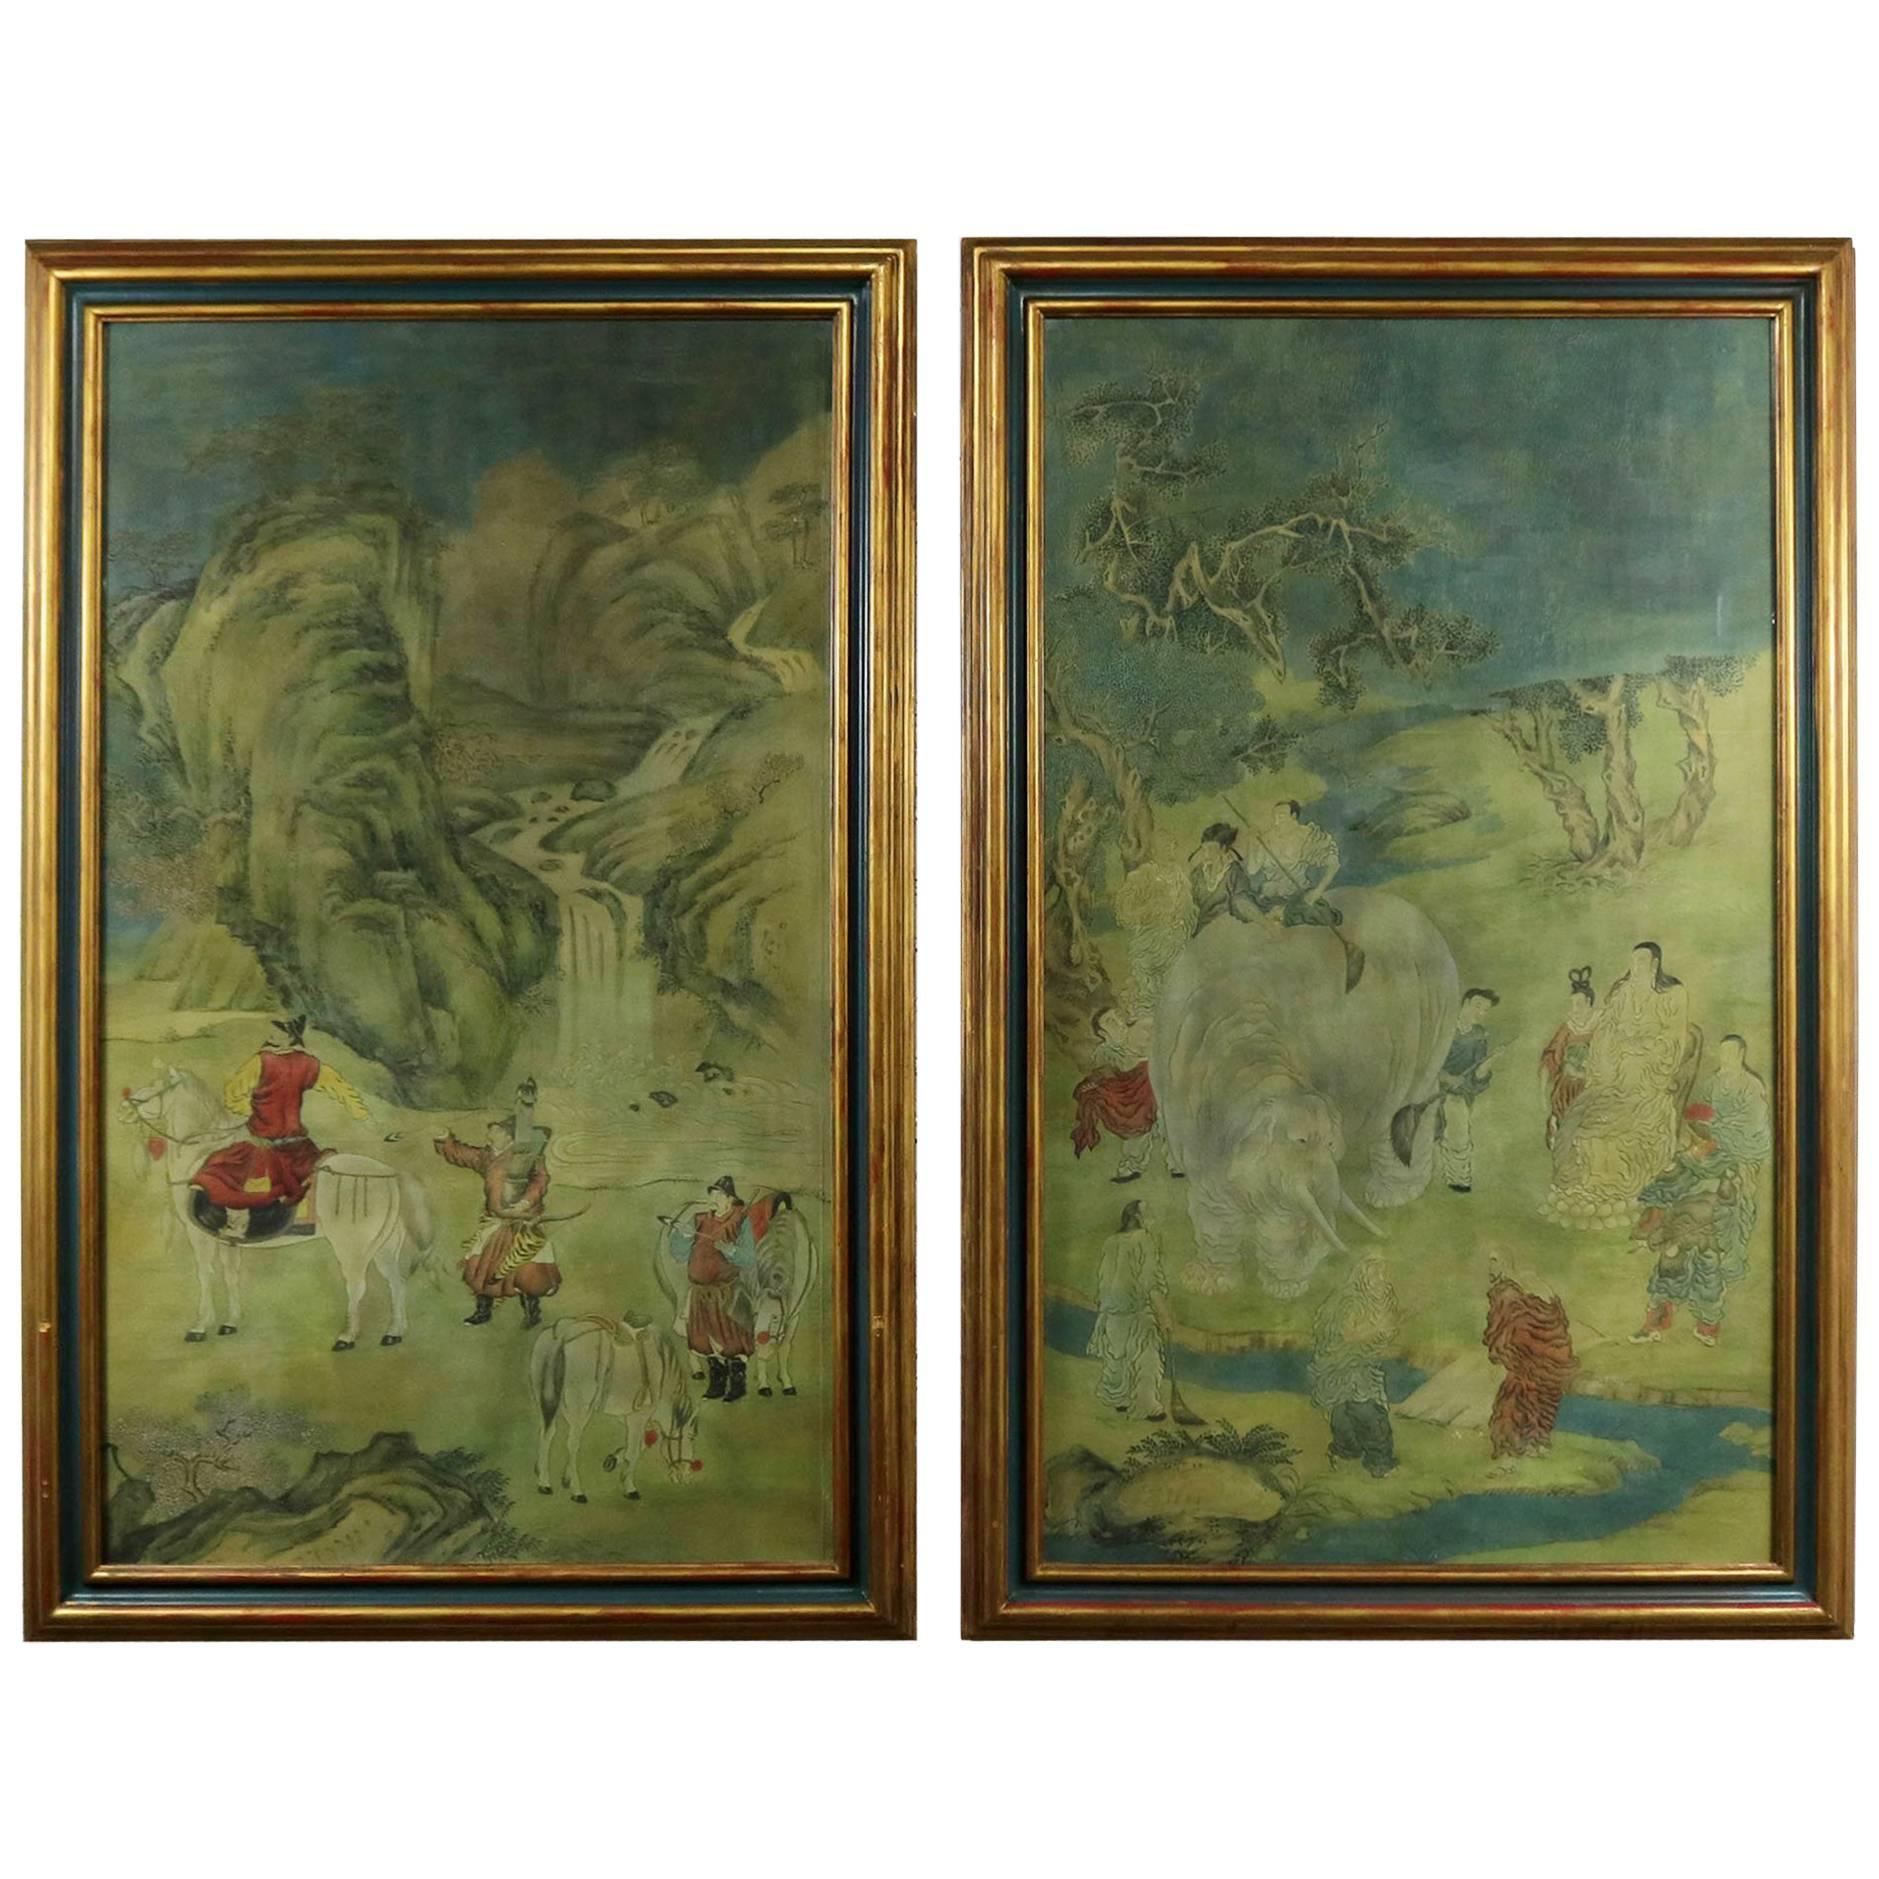 Chinese Ink and Color on Paper Framed Art a Monumental, Pair